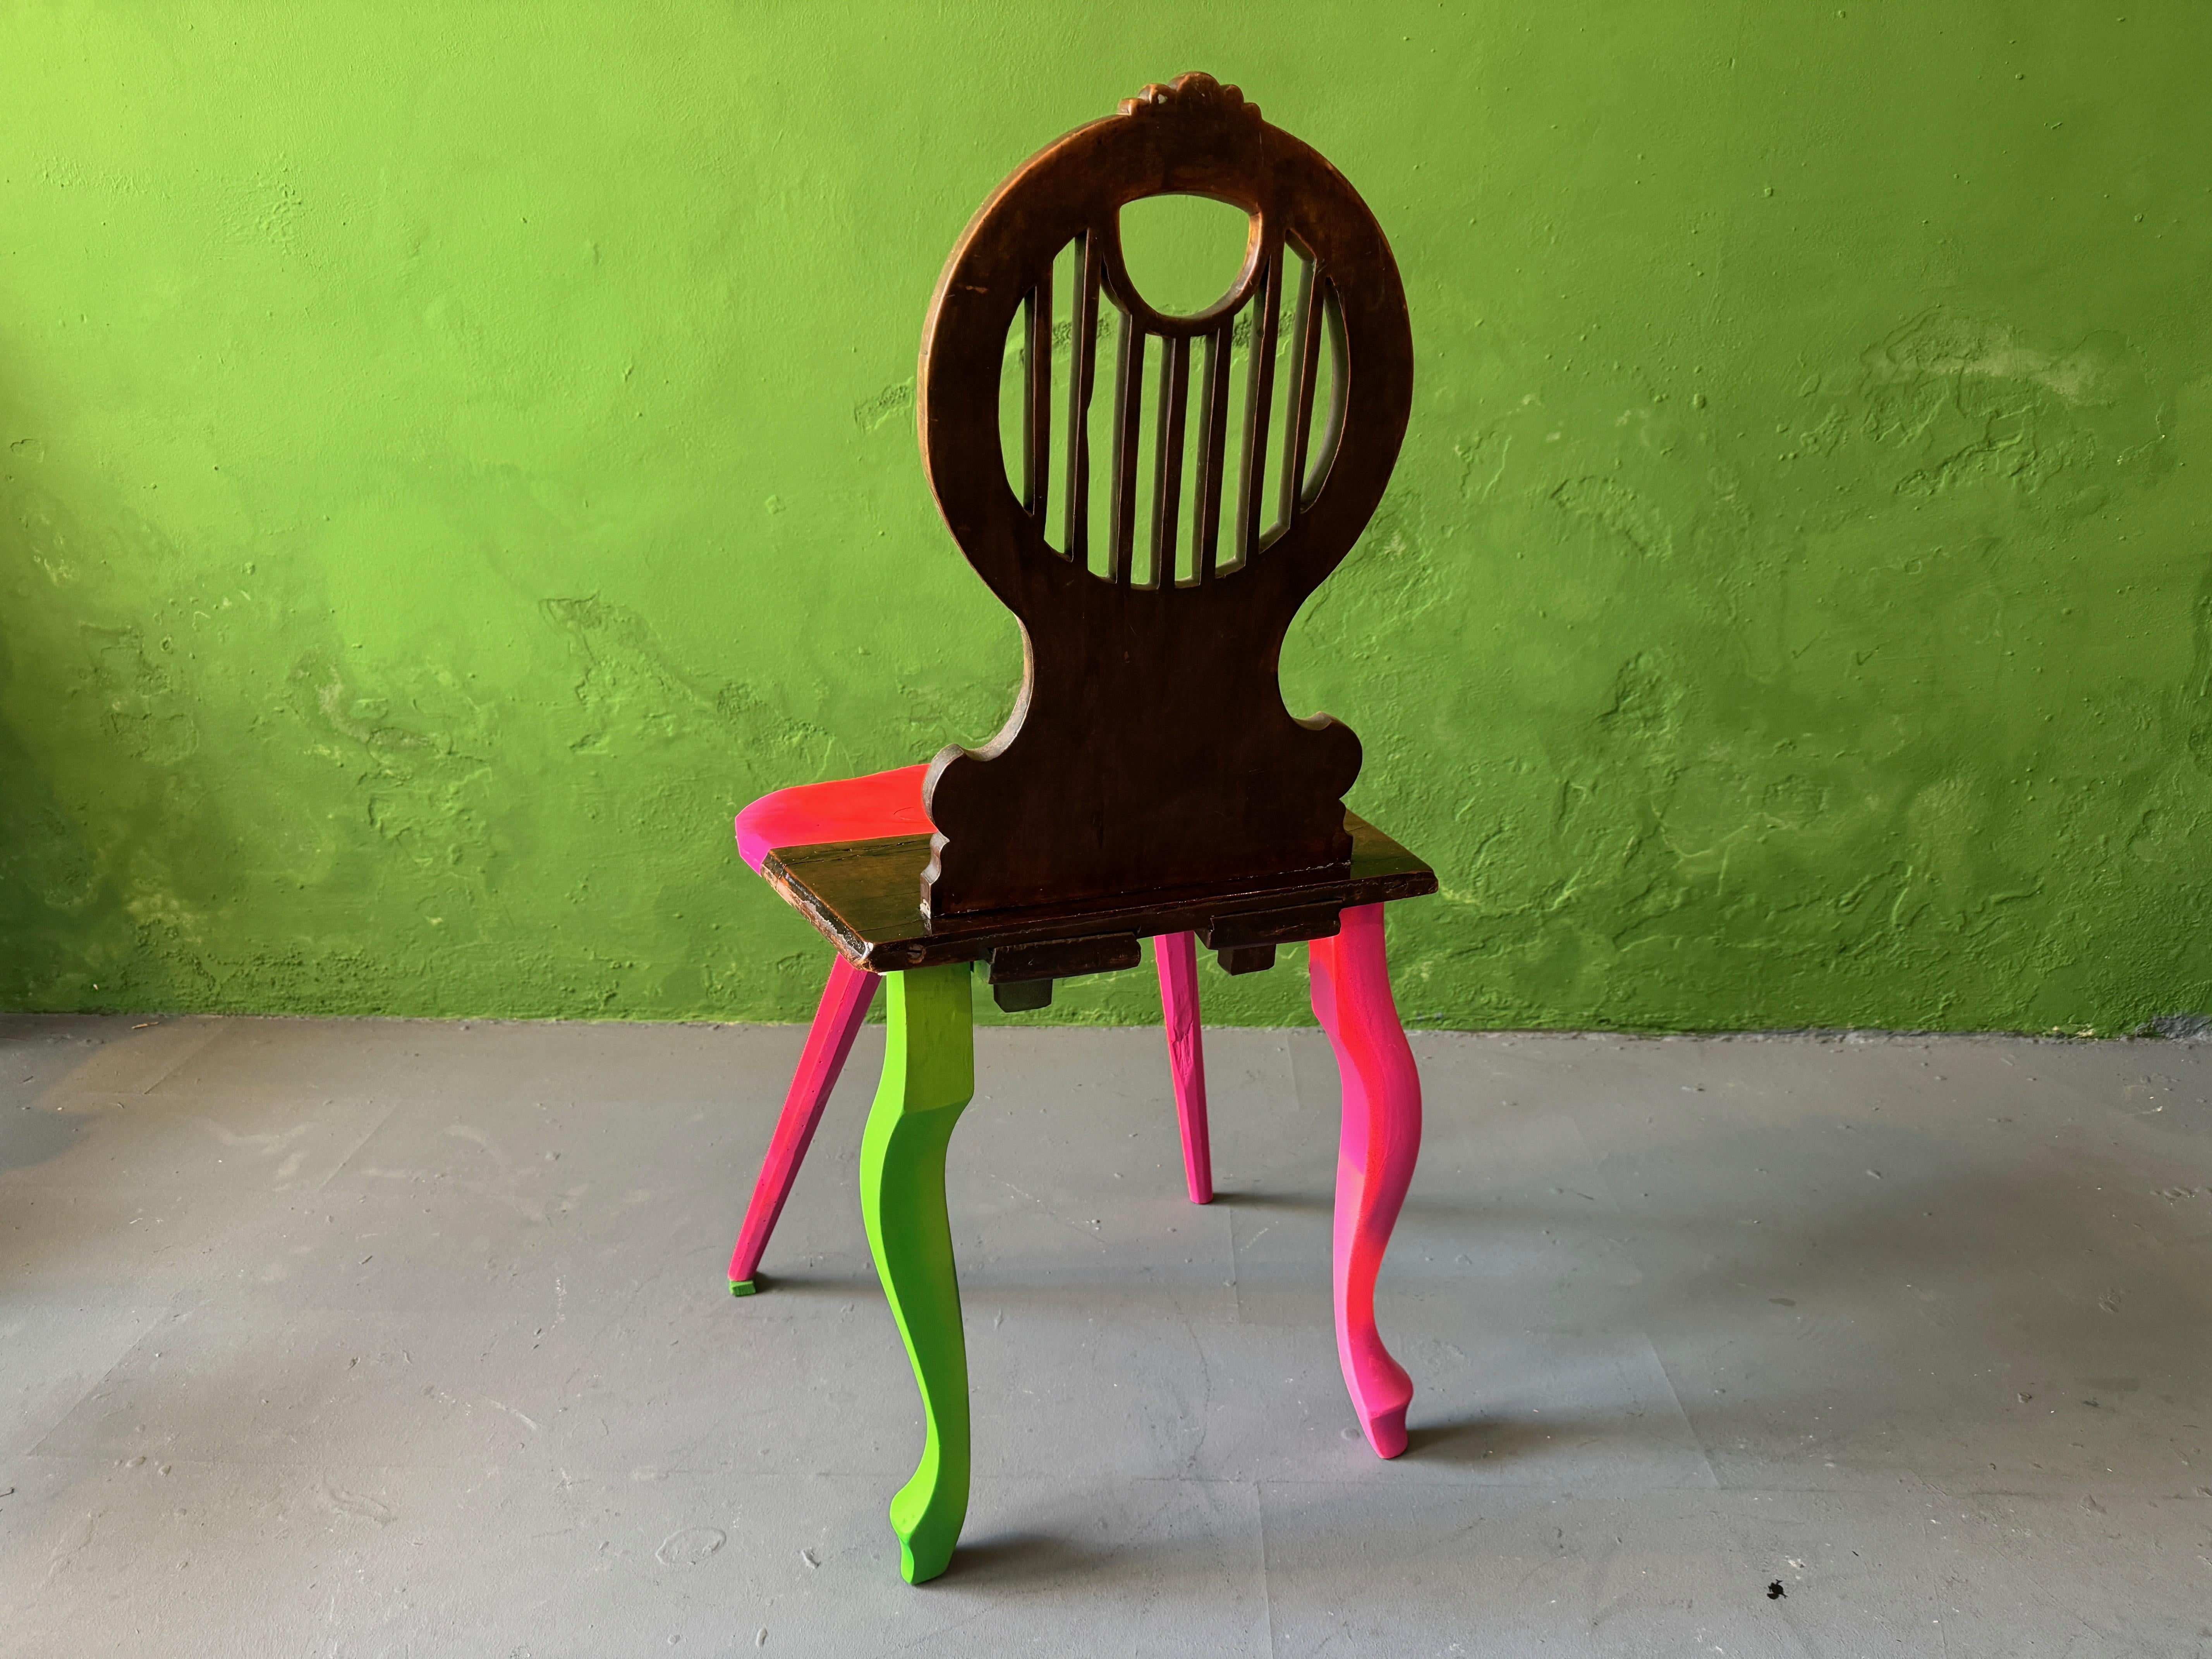 Contemporized Farnchair by Markus Friedrich Staab For Sale 4